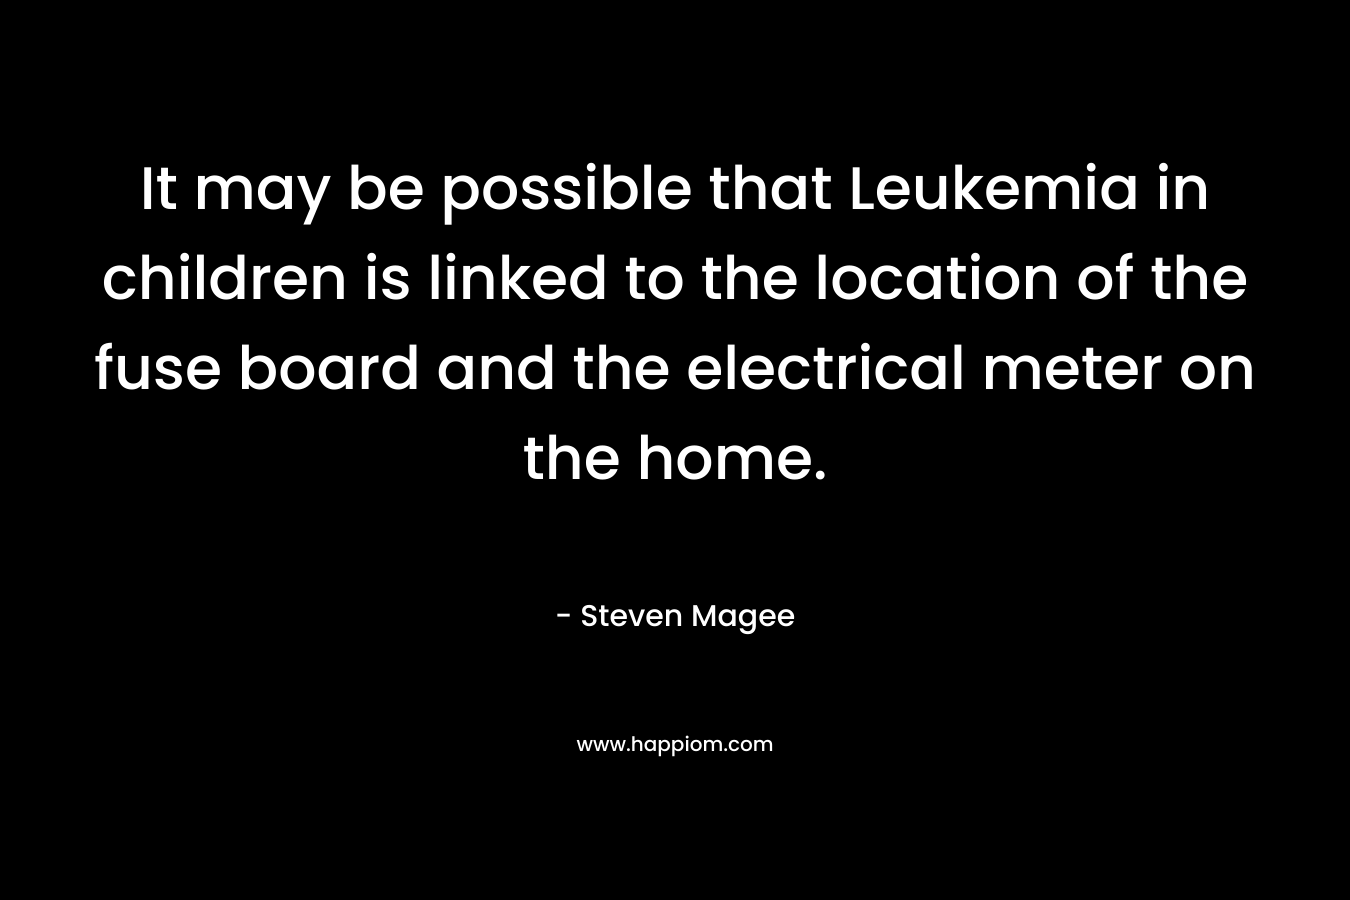 It may be possible that Leukemia in children is linked to the location of the fuse board and the electrical meter on the home. – Steven Magee